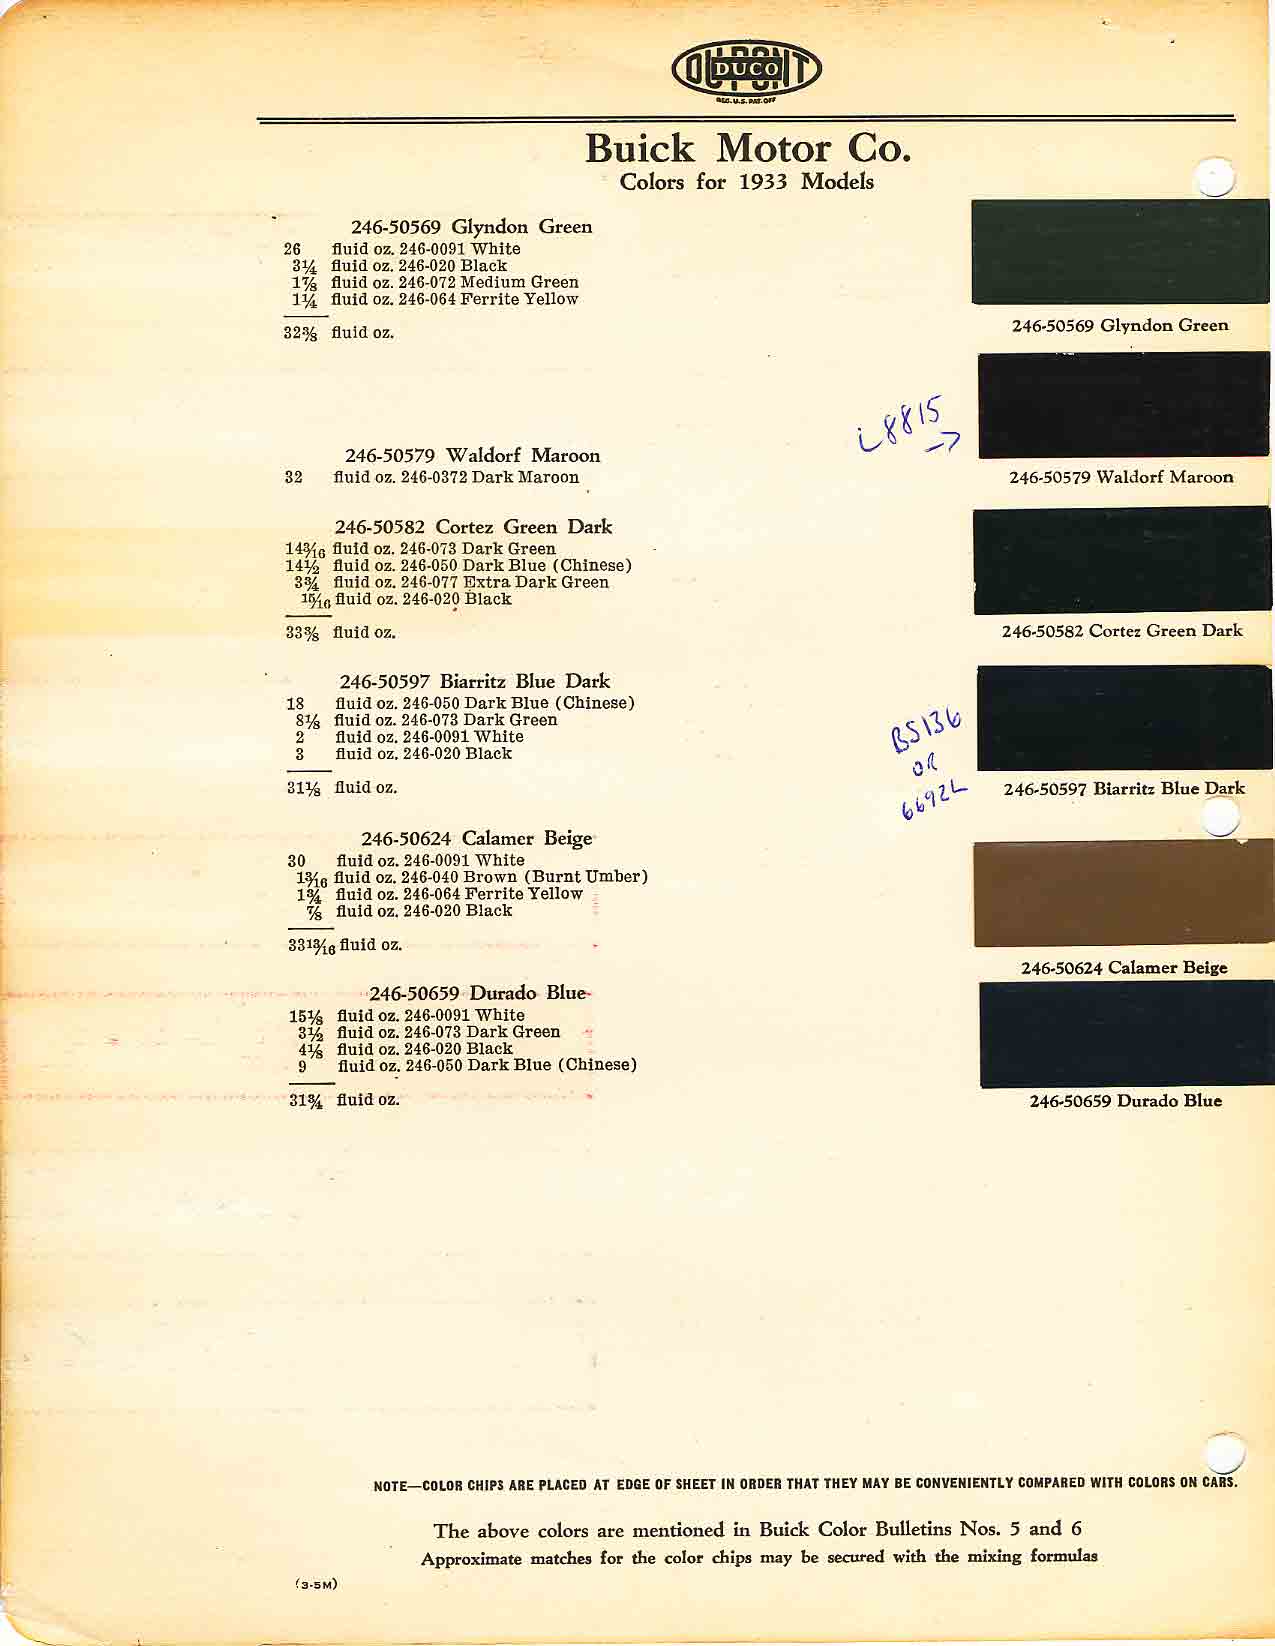 Colors and codes used on Buick Vehicles in 1933